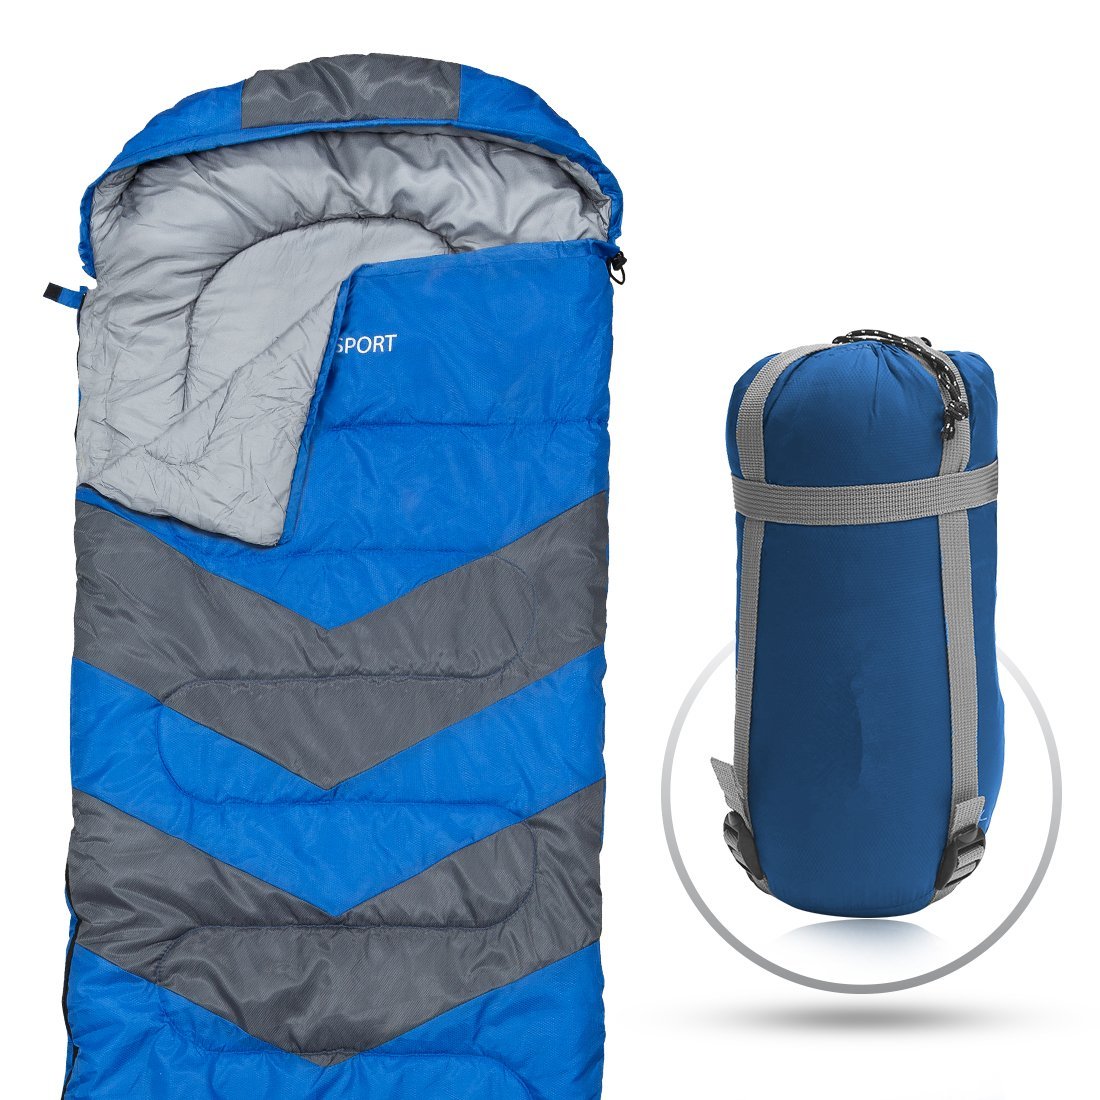 Today only: Abco Tech sleeping bag for $24